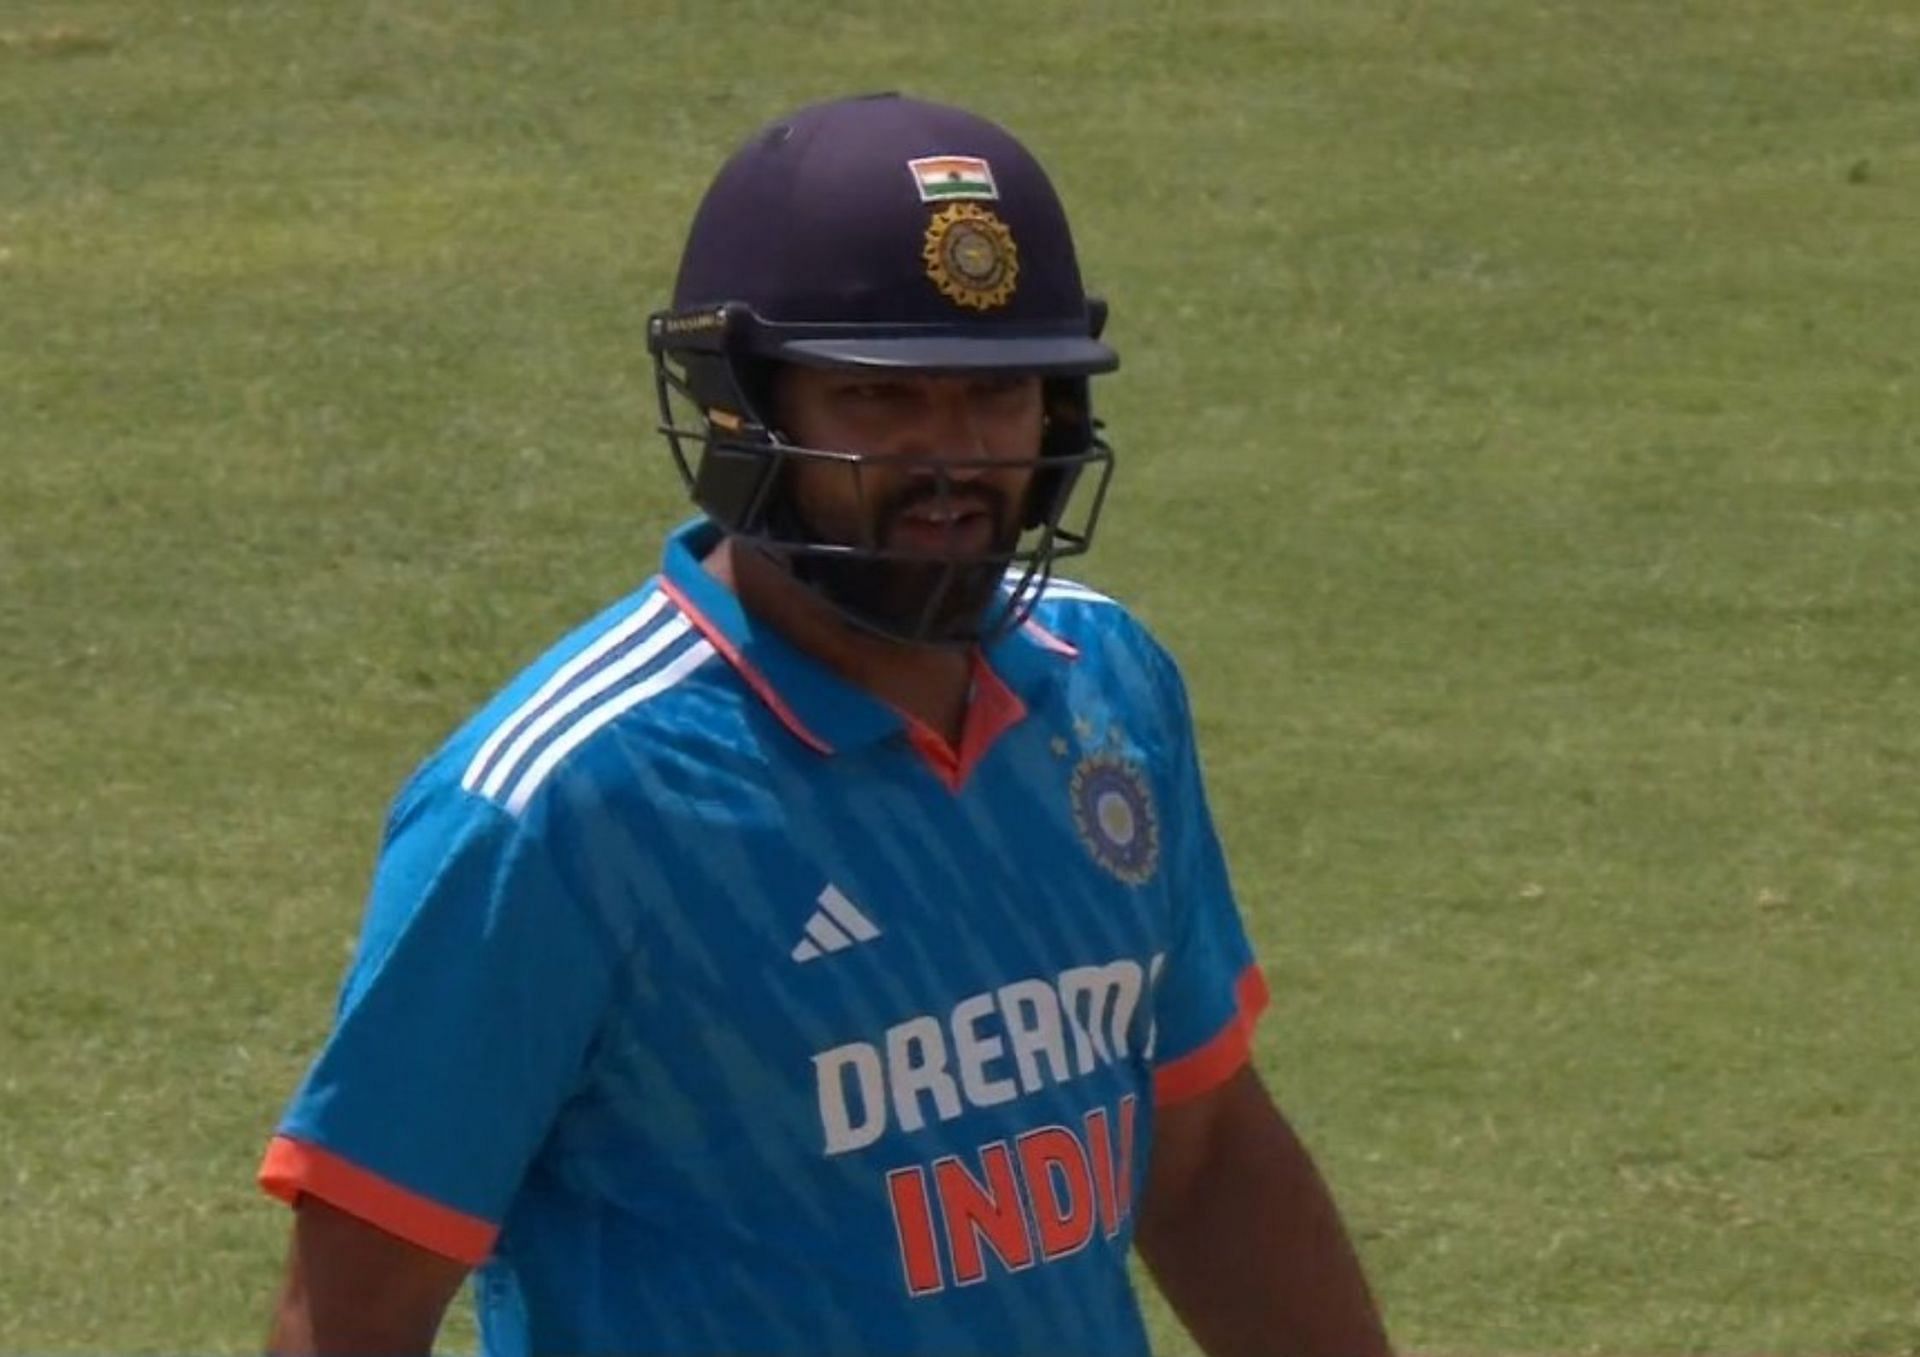 Rohit Sharma batted at number 7 in the opening ODI against the West Indies (Picture Credits: Fancode via Twitter).